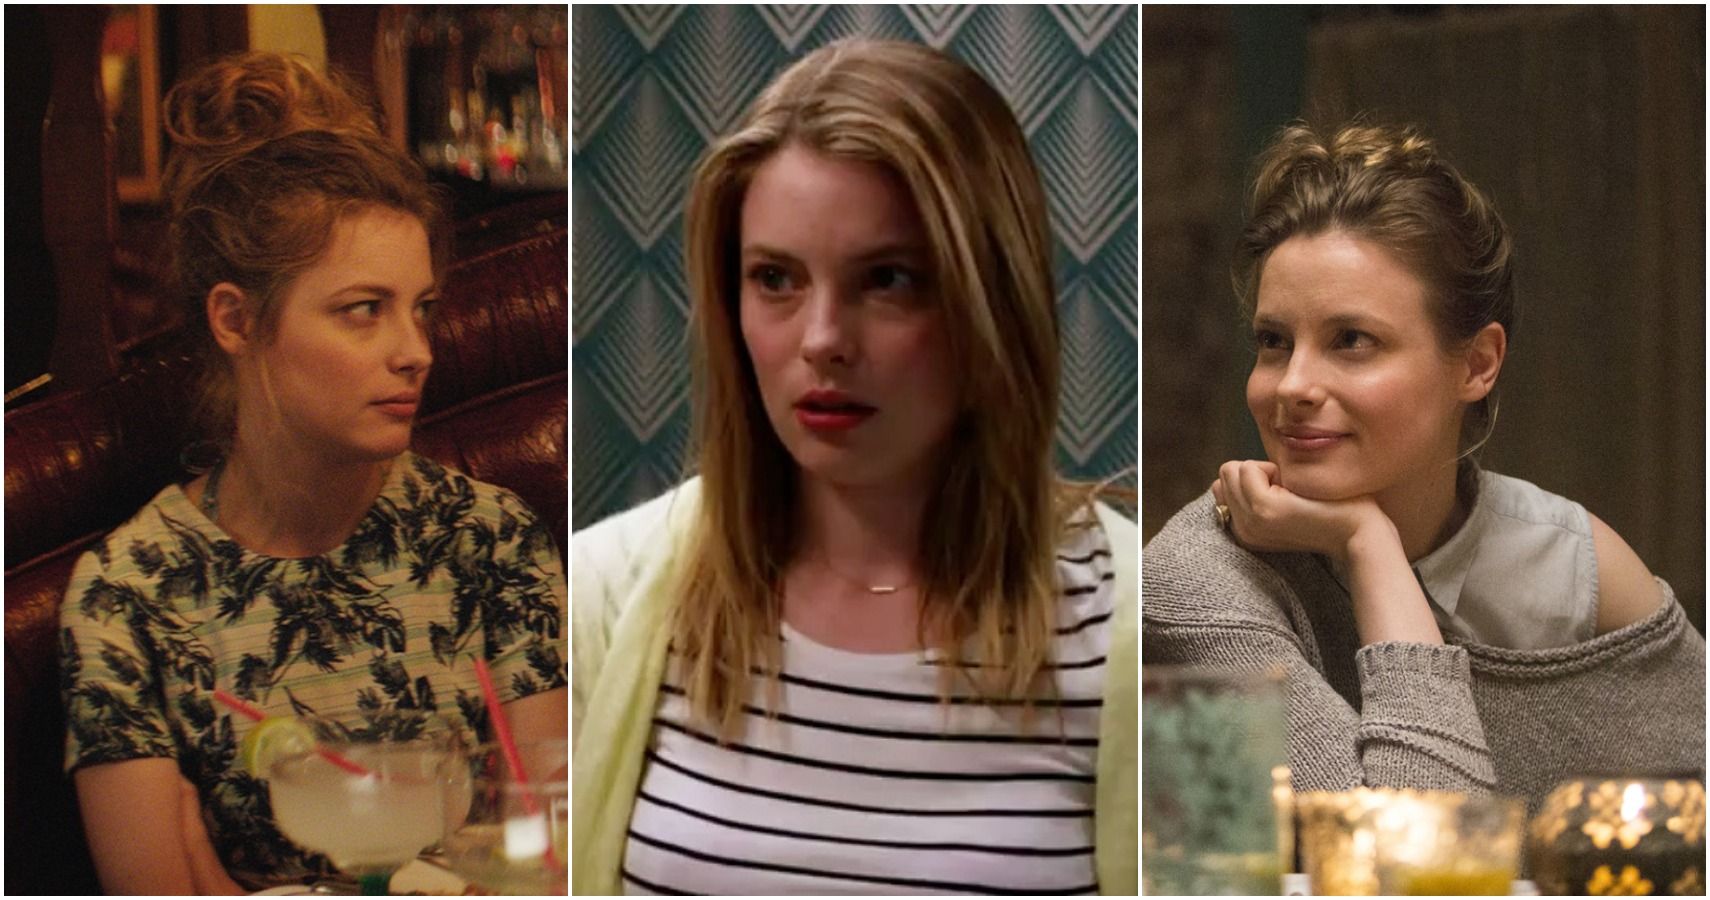 Gillian Jacobs 10 Best Roles Ranked (According To IMDb)